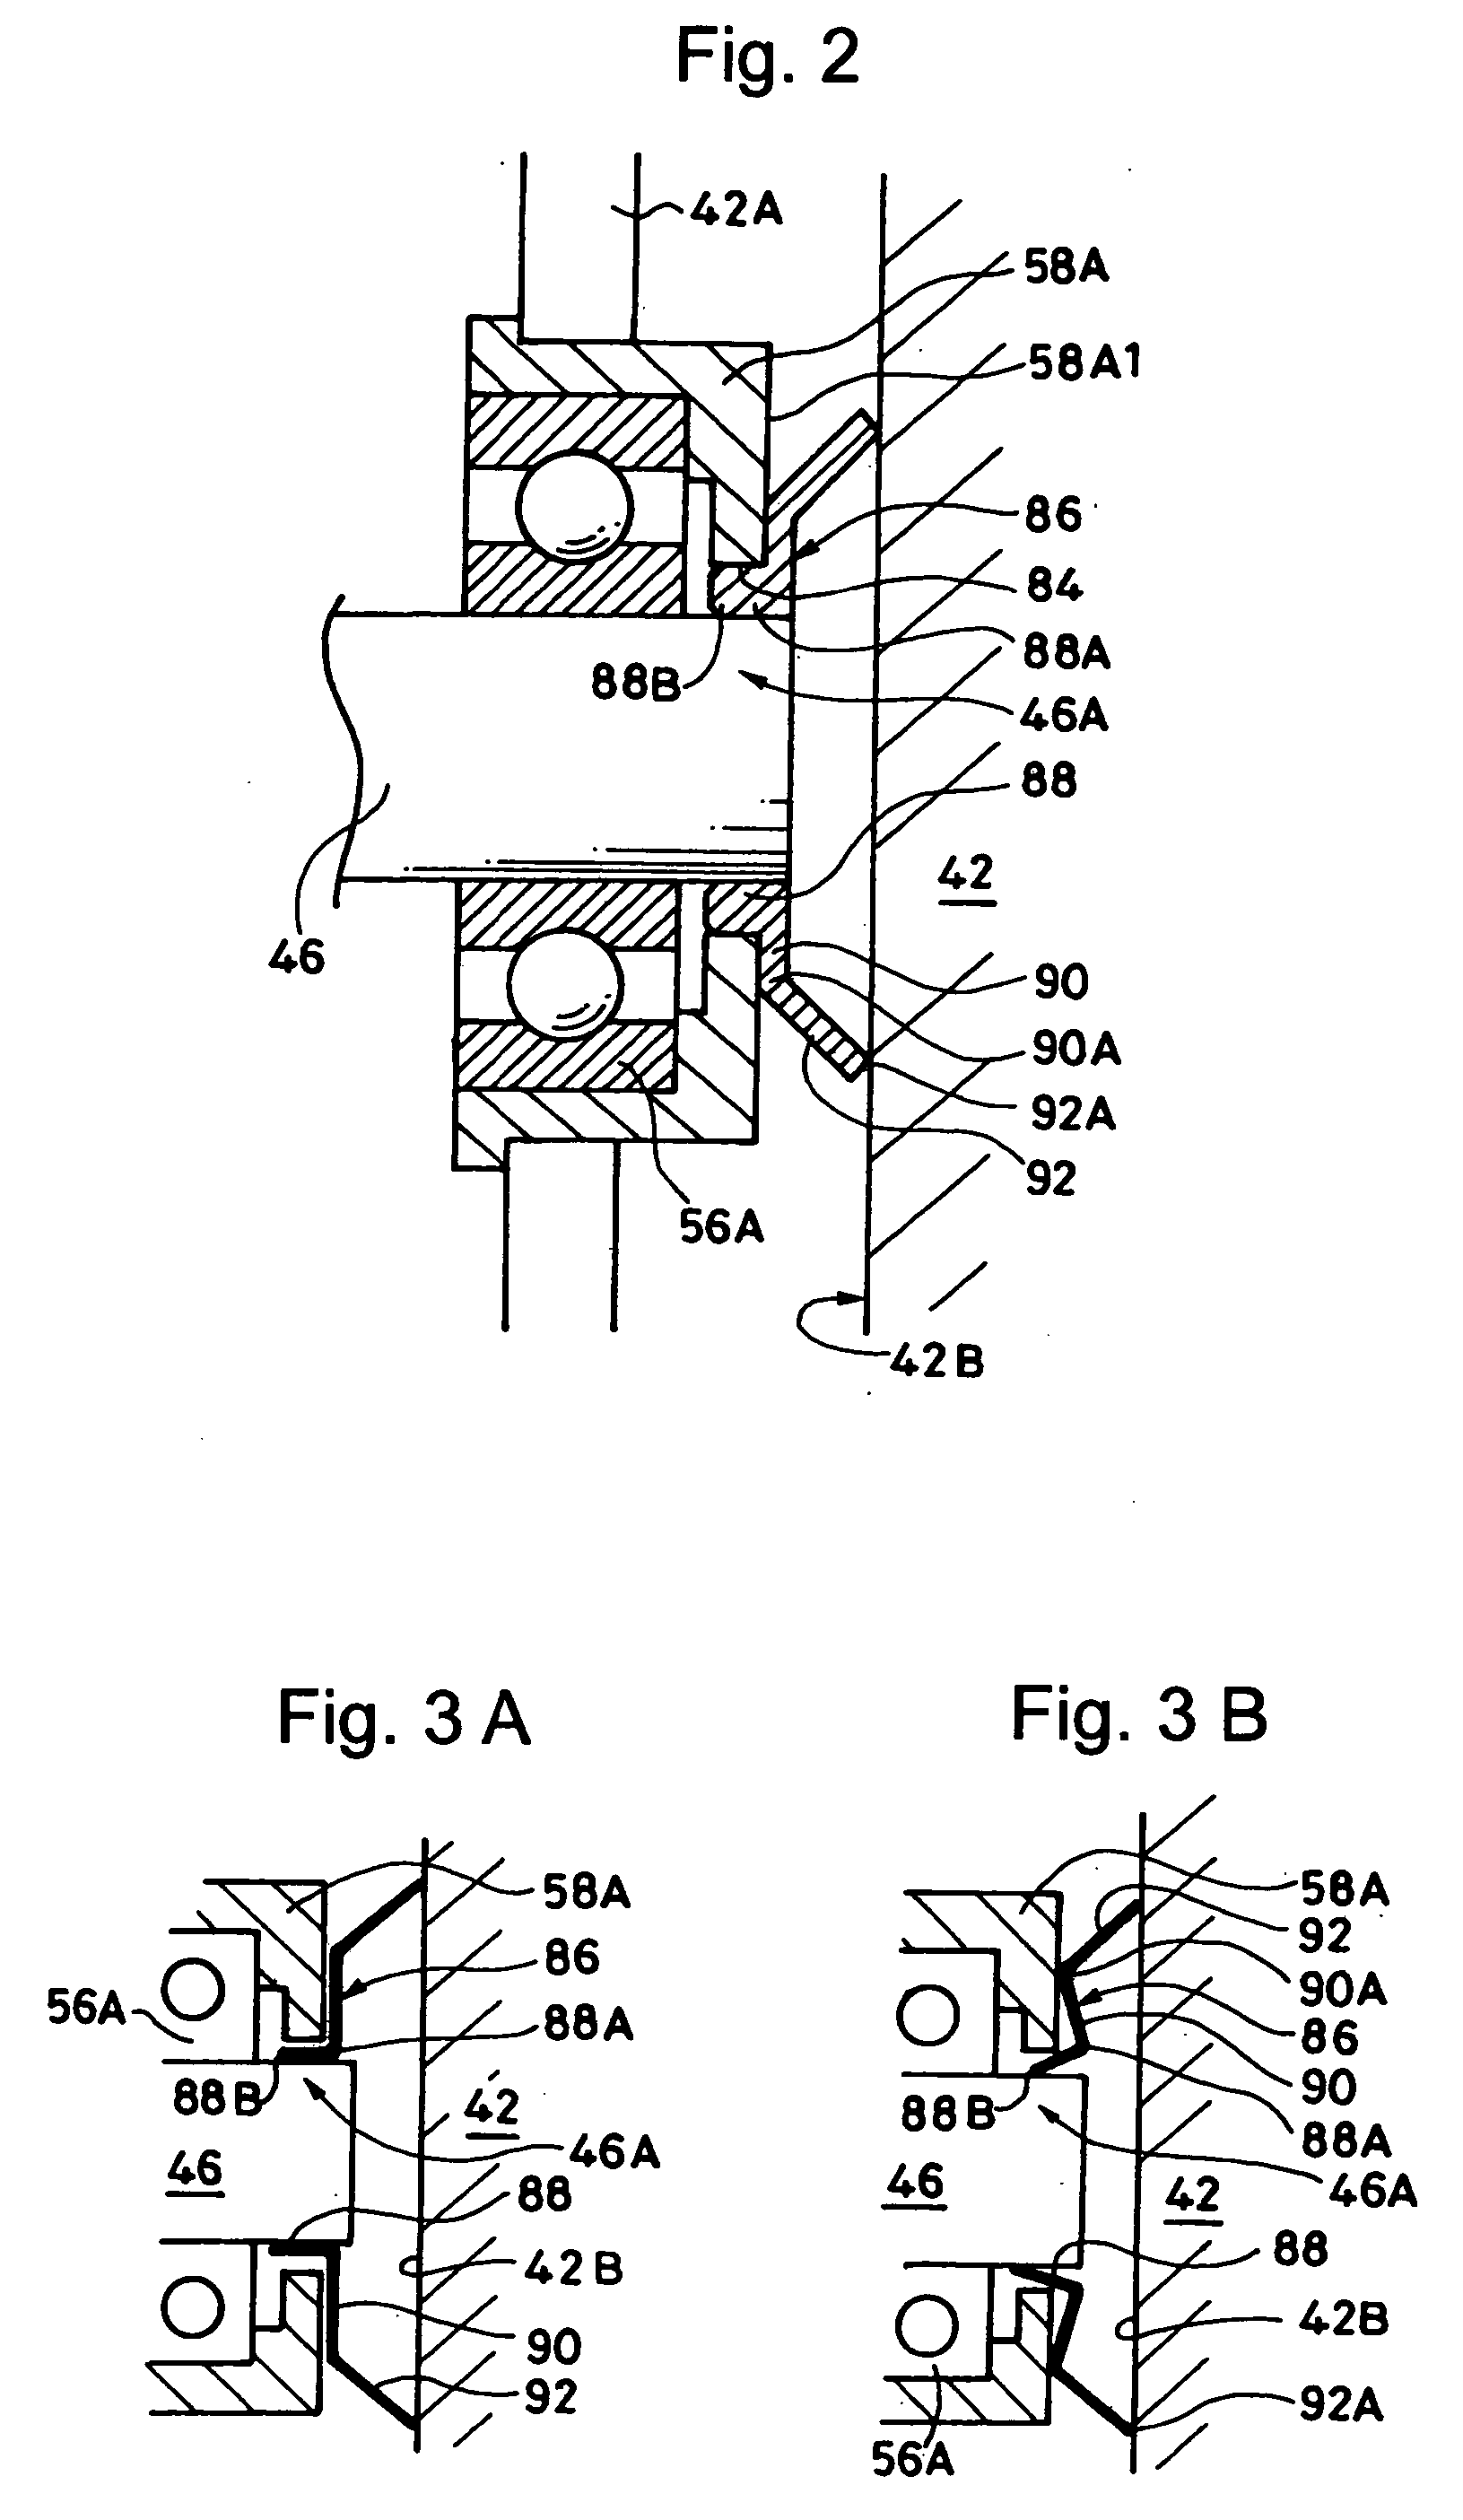 Reduction gear and reduction gear frictional load application member